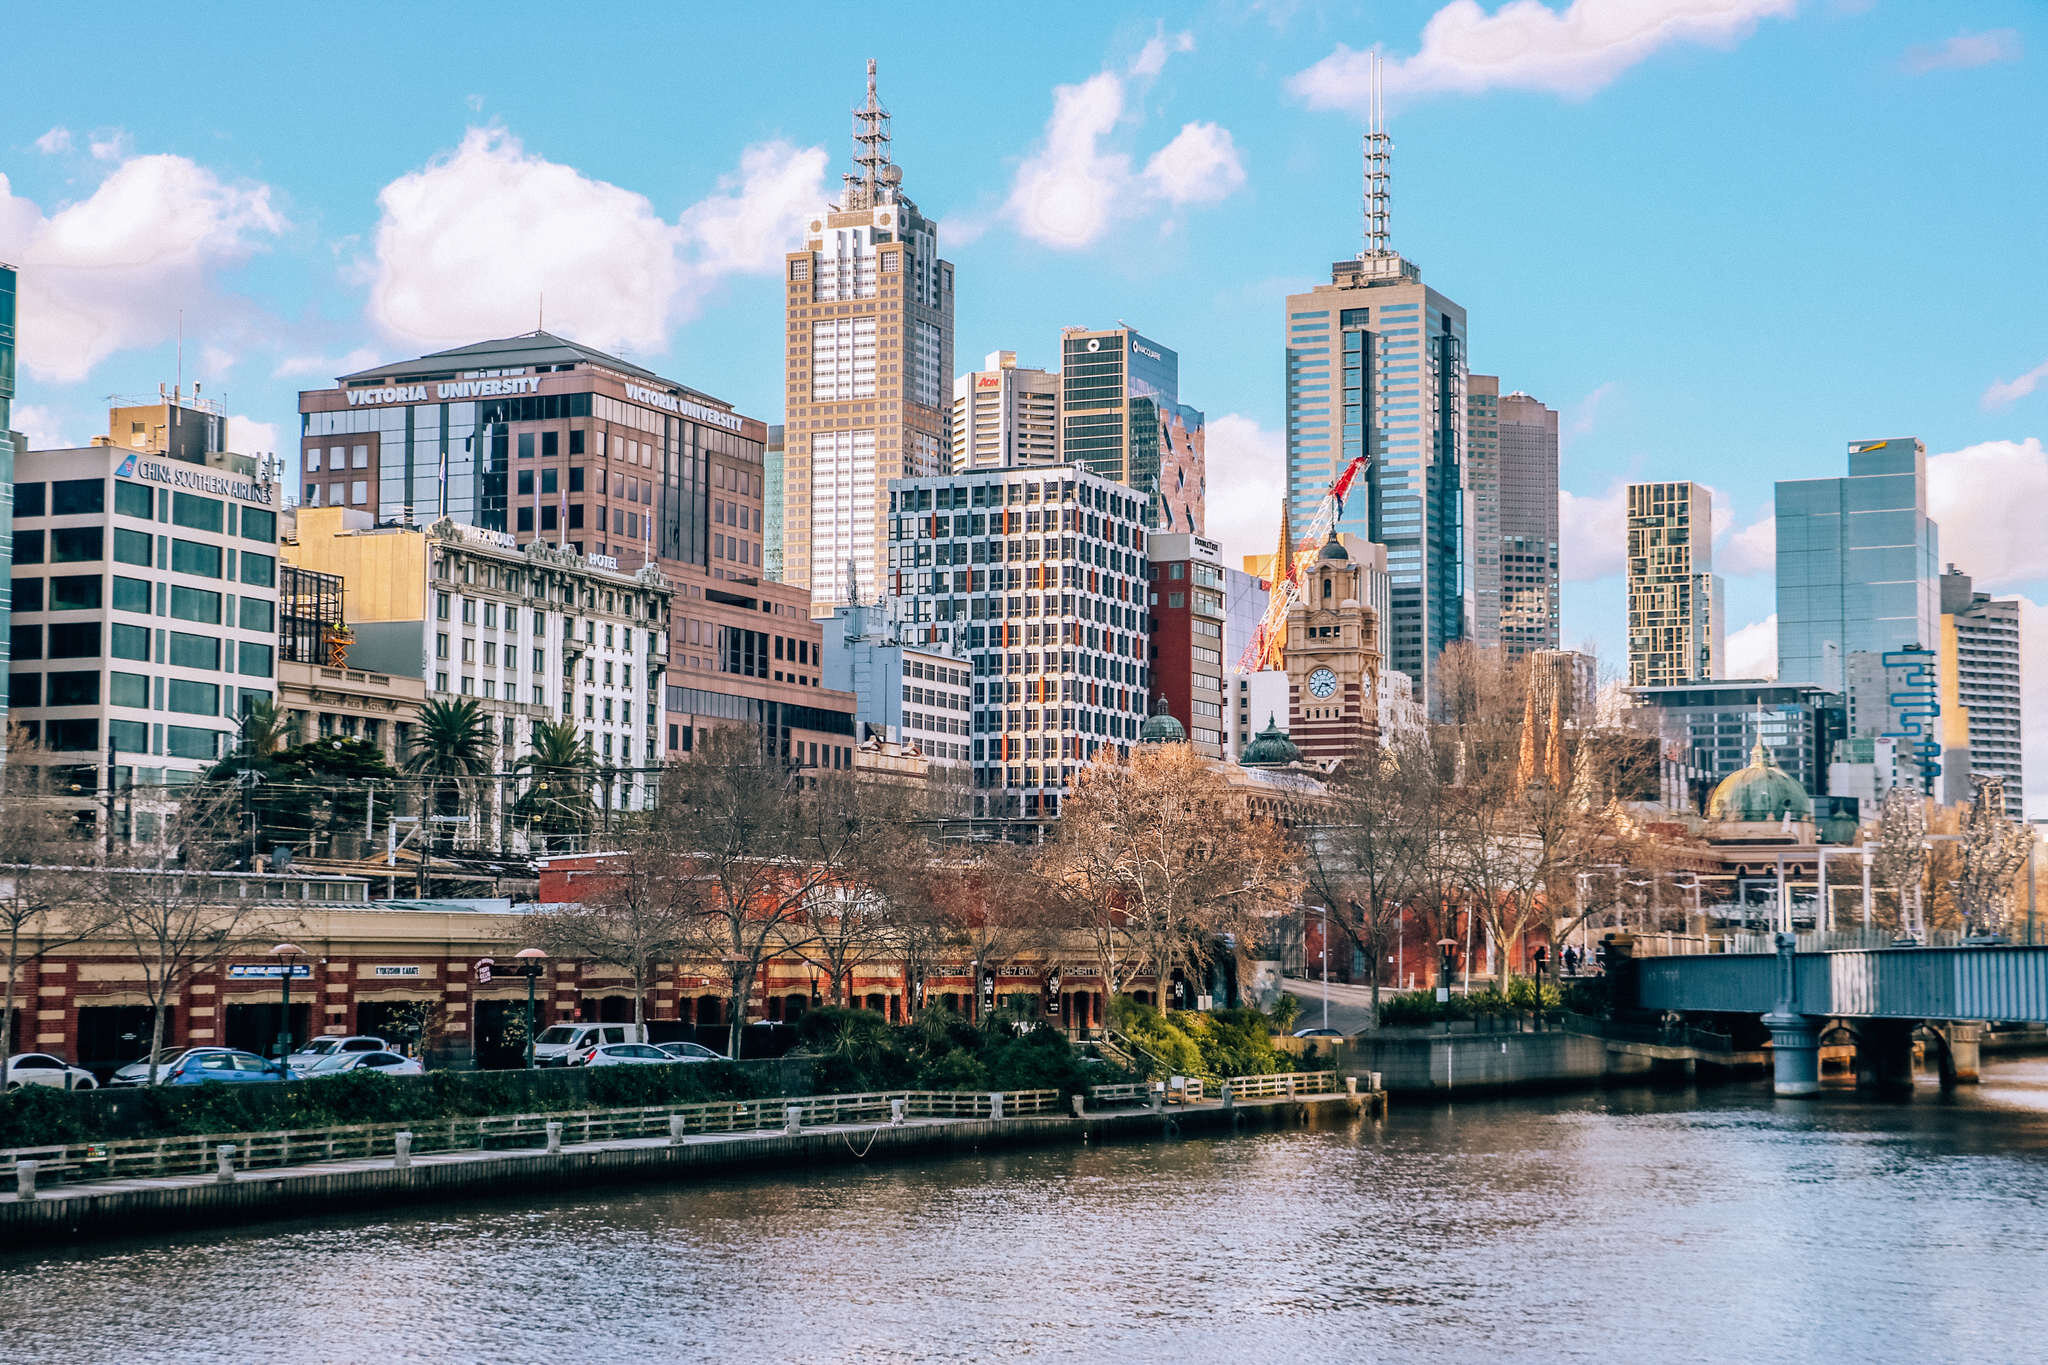 An across the river view of the Melbourne skyline with many tall buildings lining the rivers edge